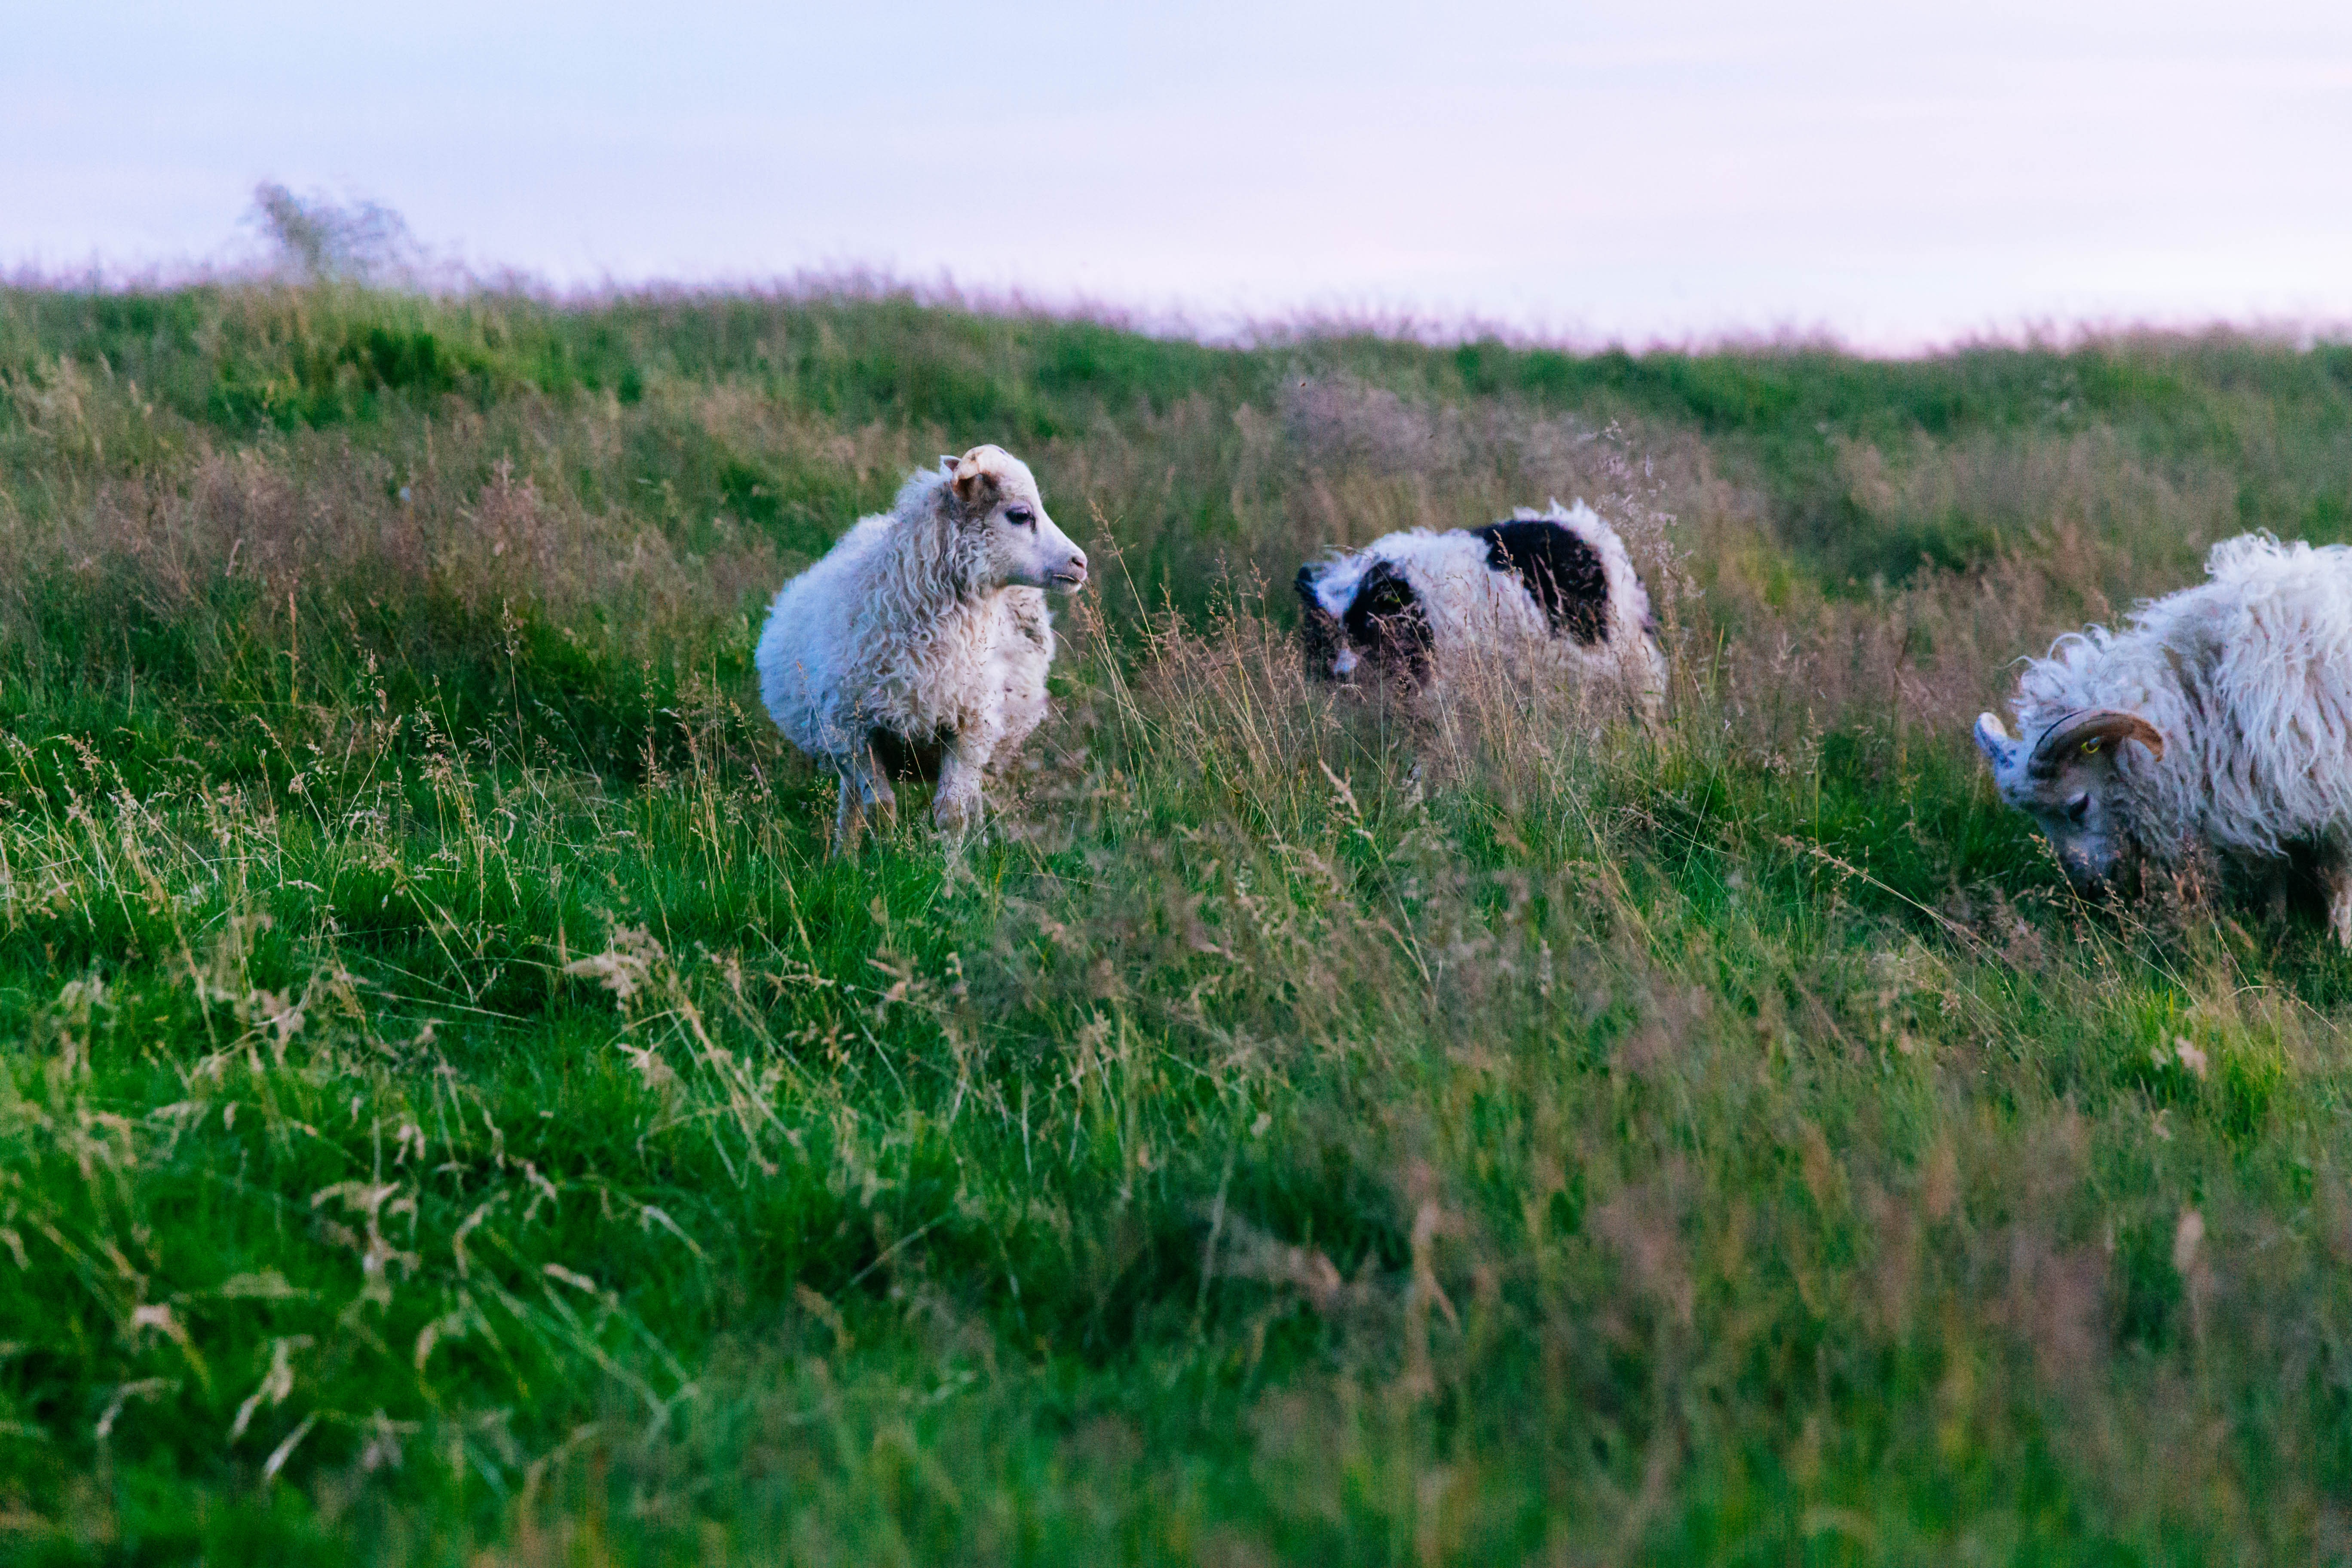 two sheep with white and black long haired dog in grass field